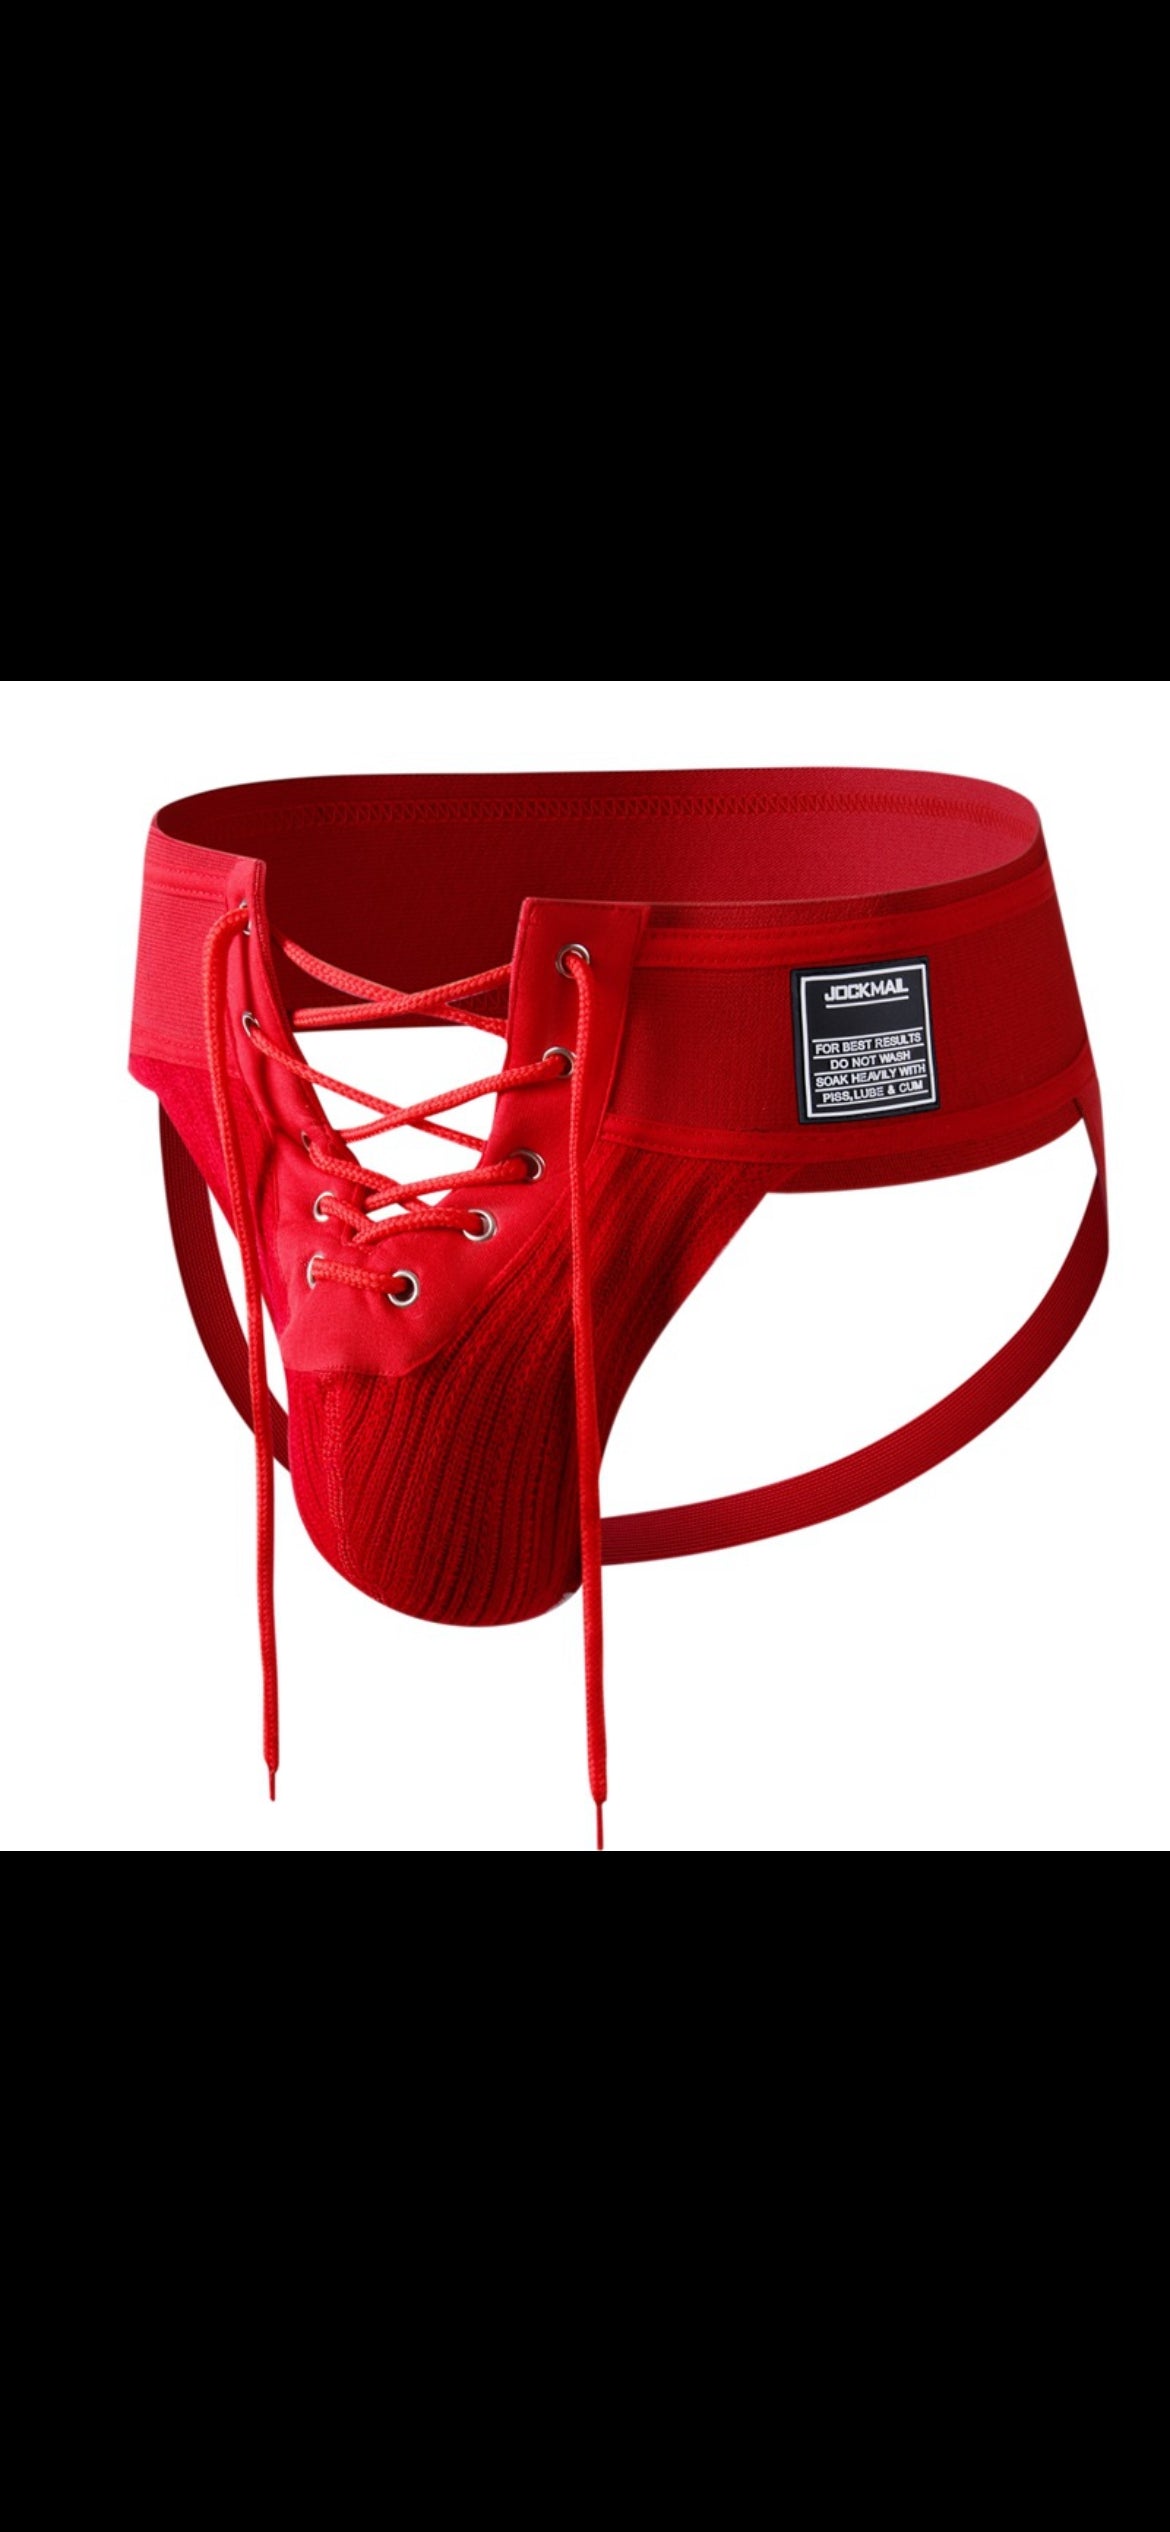 Stylish, comfortable and comfortable jock straps with stylish details such as lacing at the front. Available in 6 colors